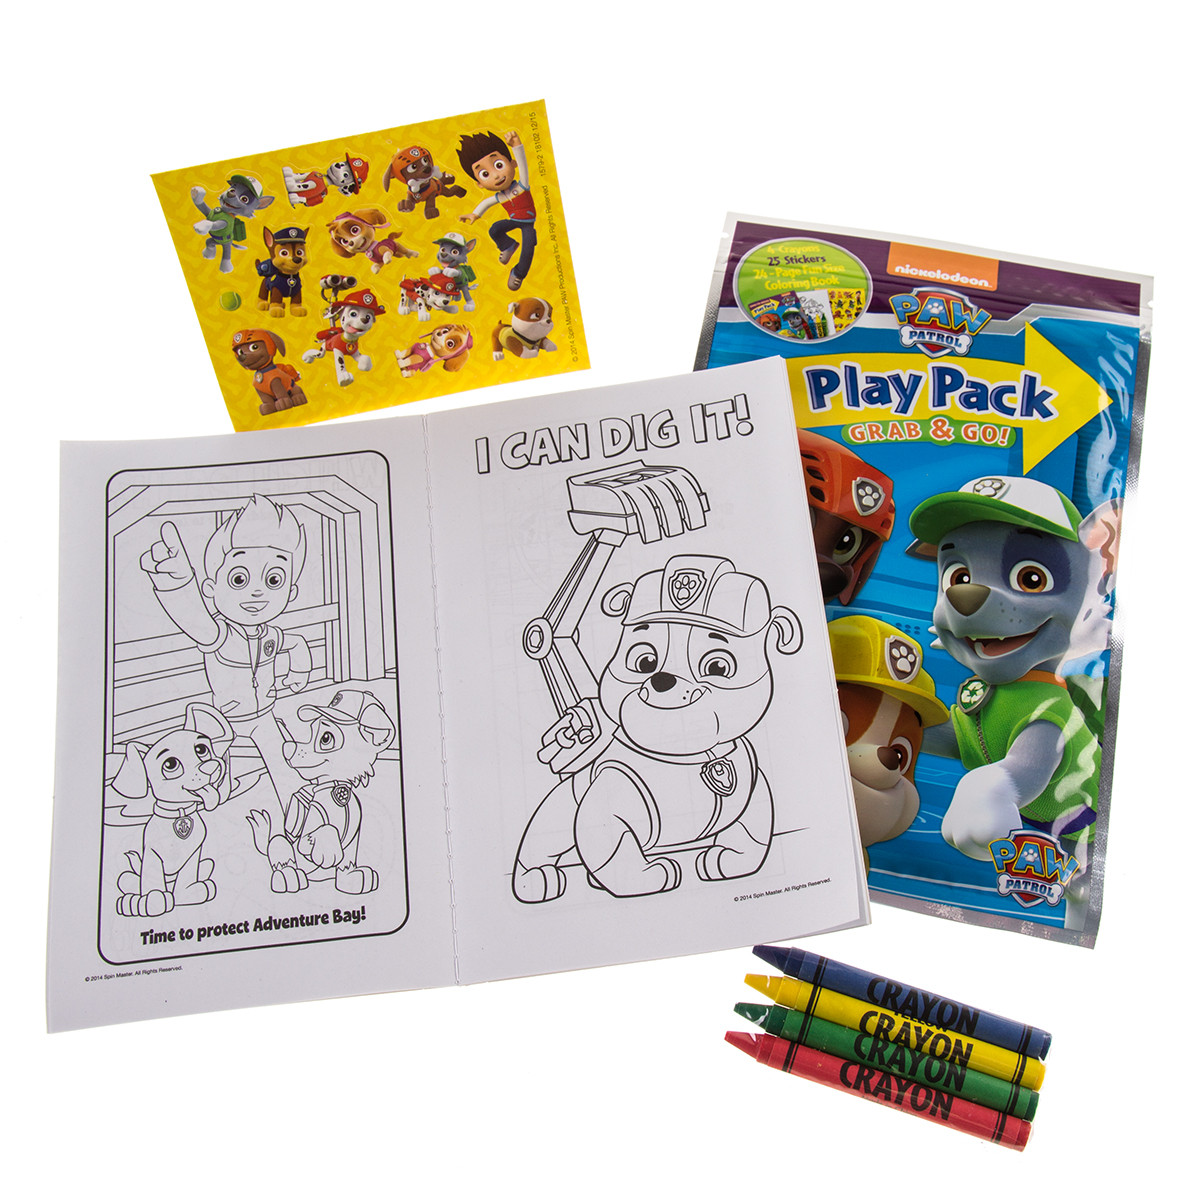 Coloring Book Party Favors
 Set 15 Bendon Kids Play Packs Fun Party Favors Coloring